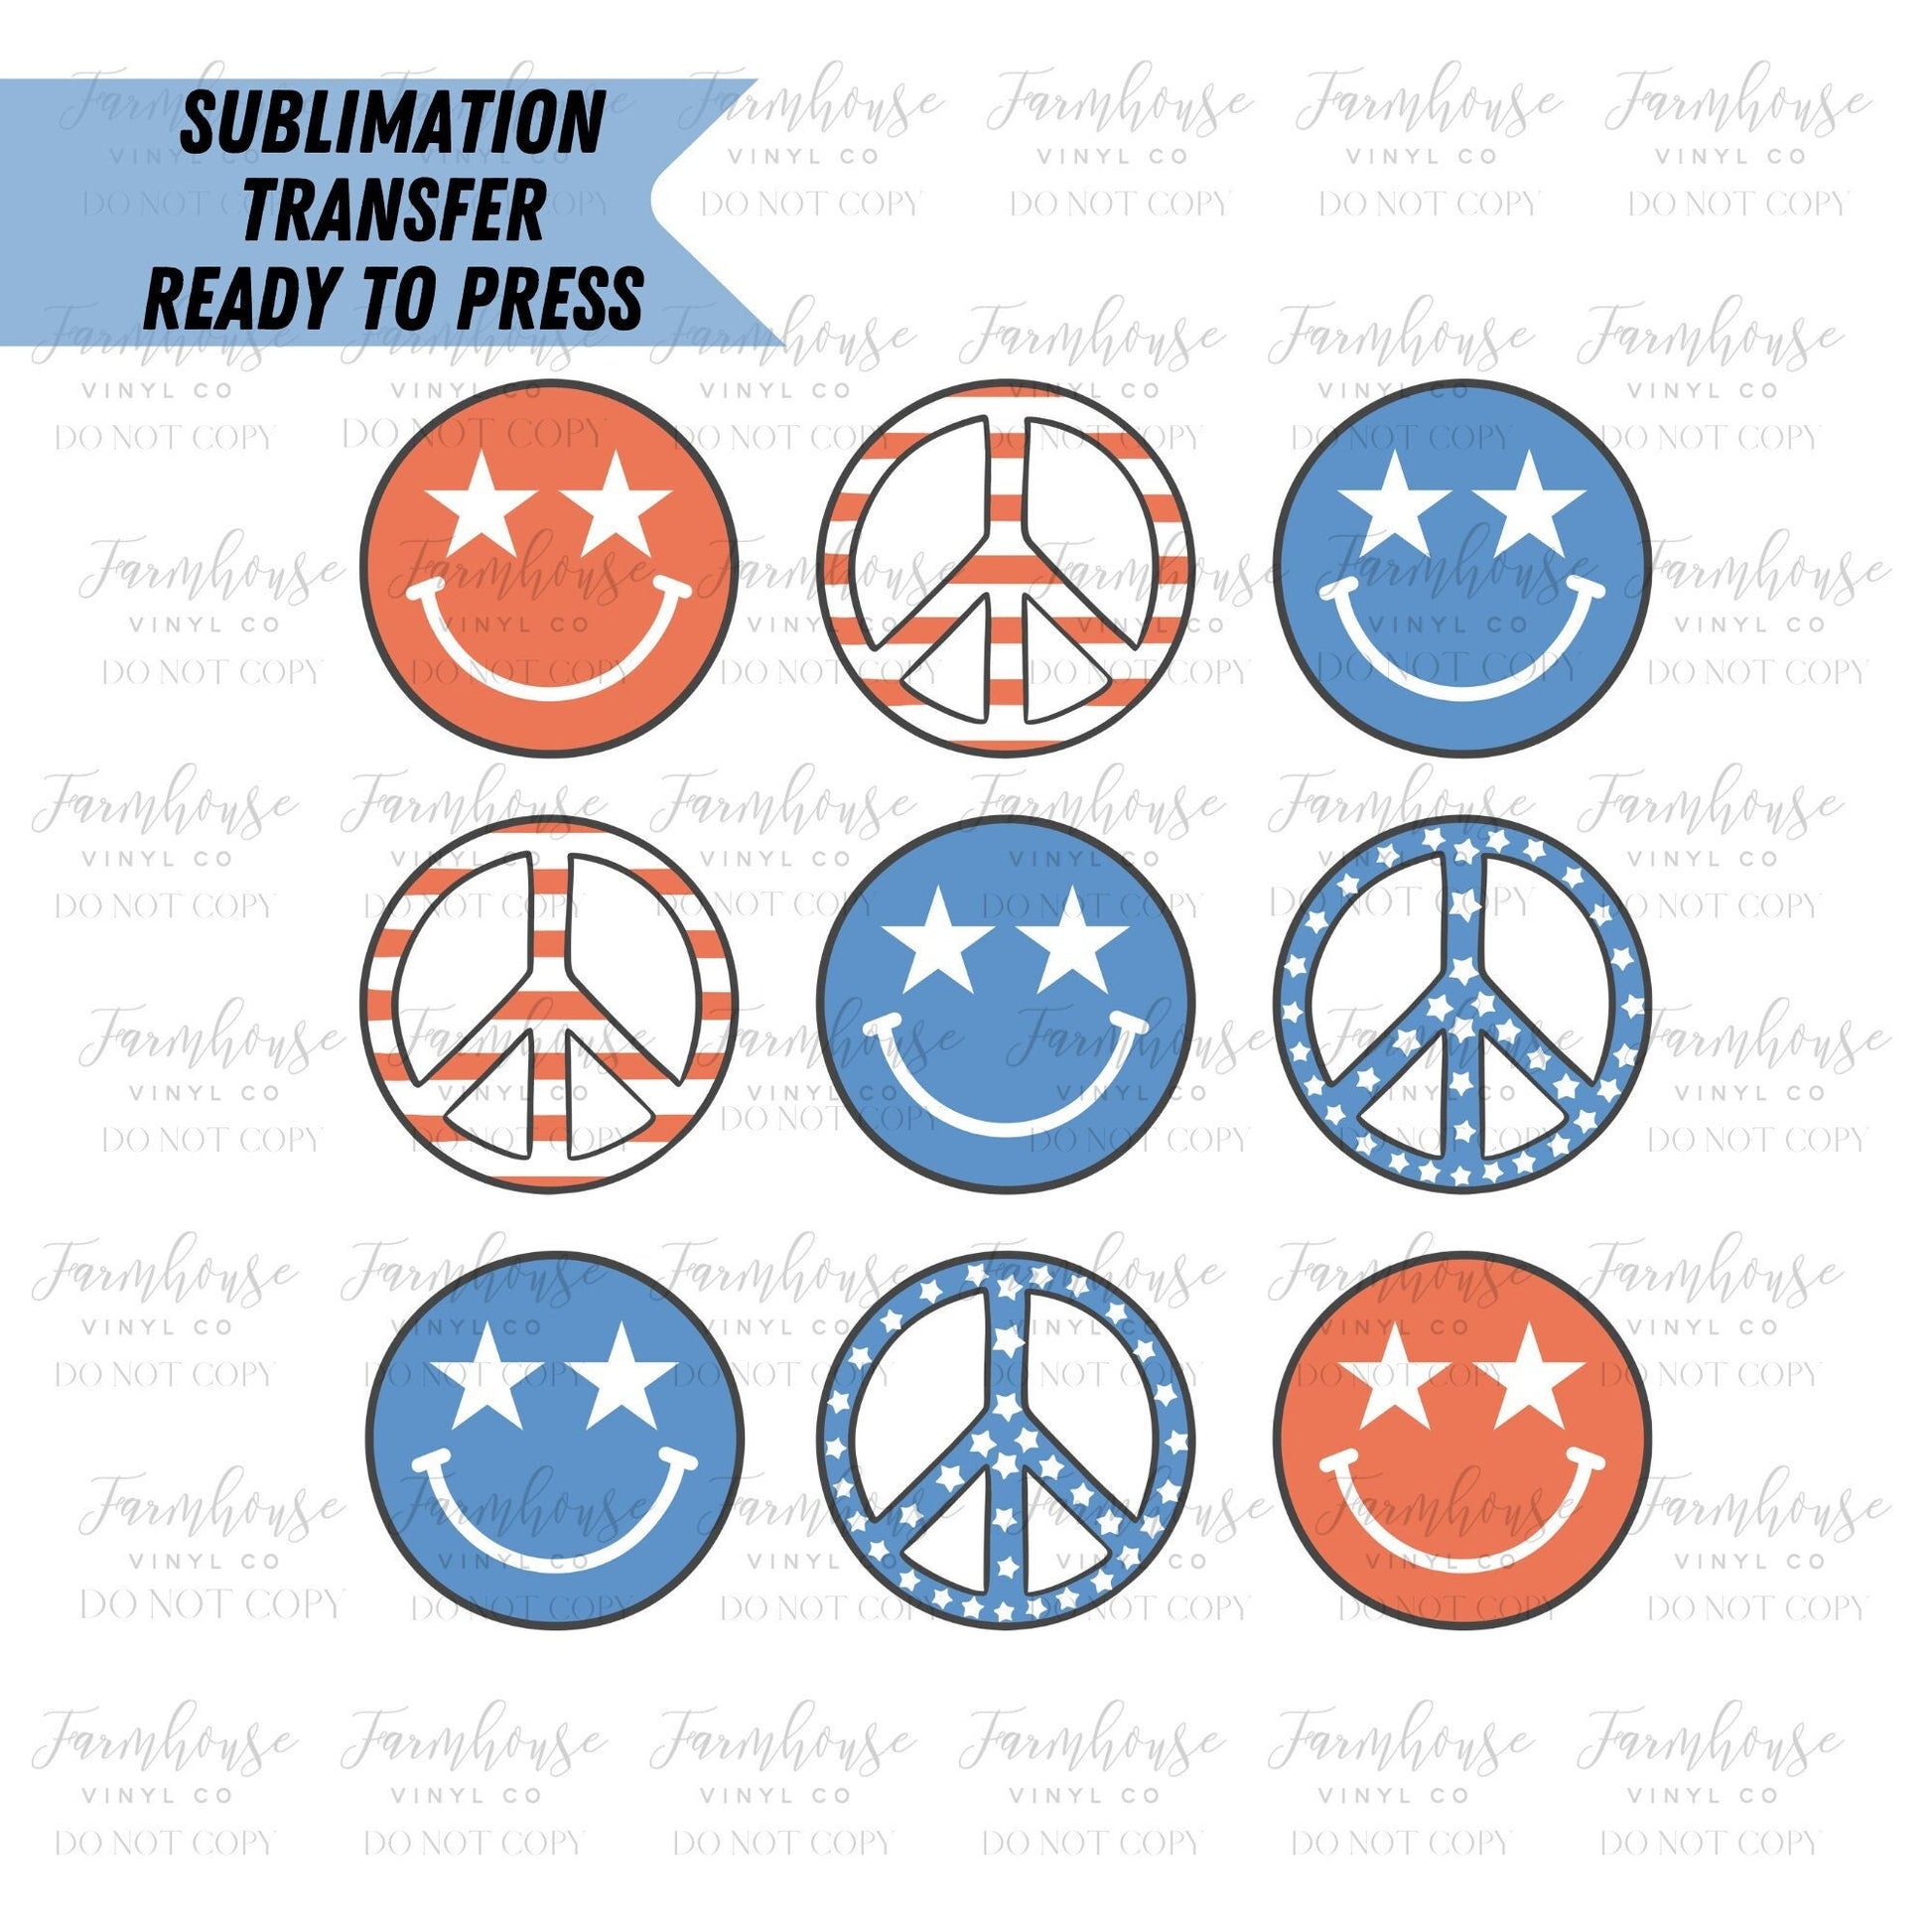 Retro 4th of July Smiley Face Peace Sign Ready to Press Sublimation Transfer - Farmhouse Vinyl Co